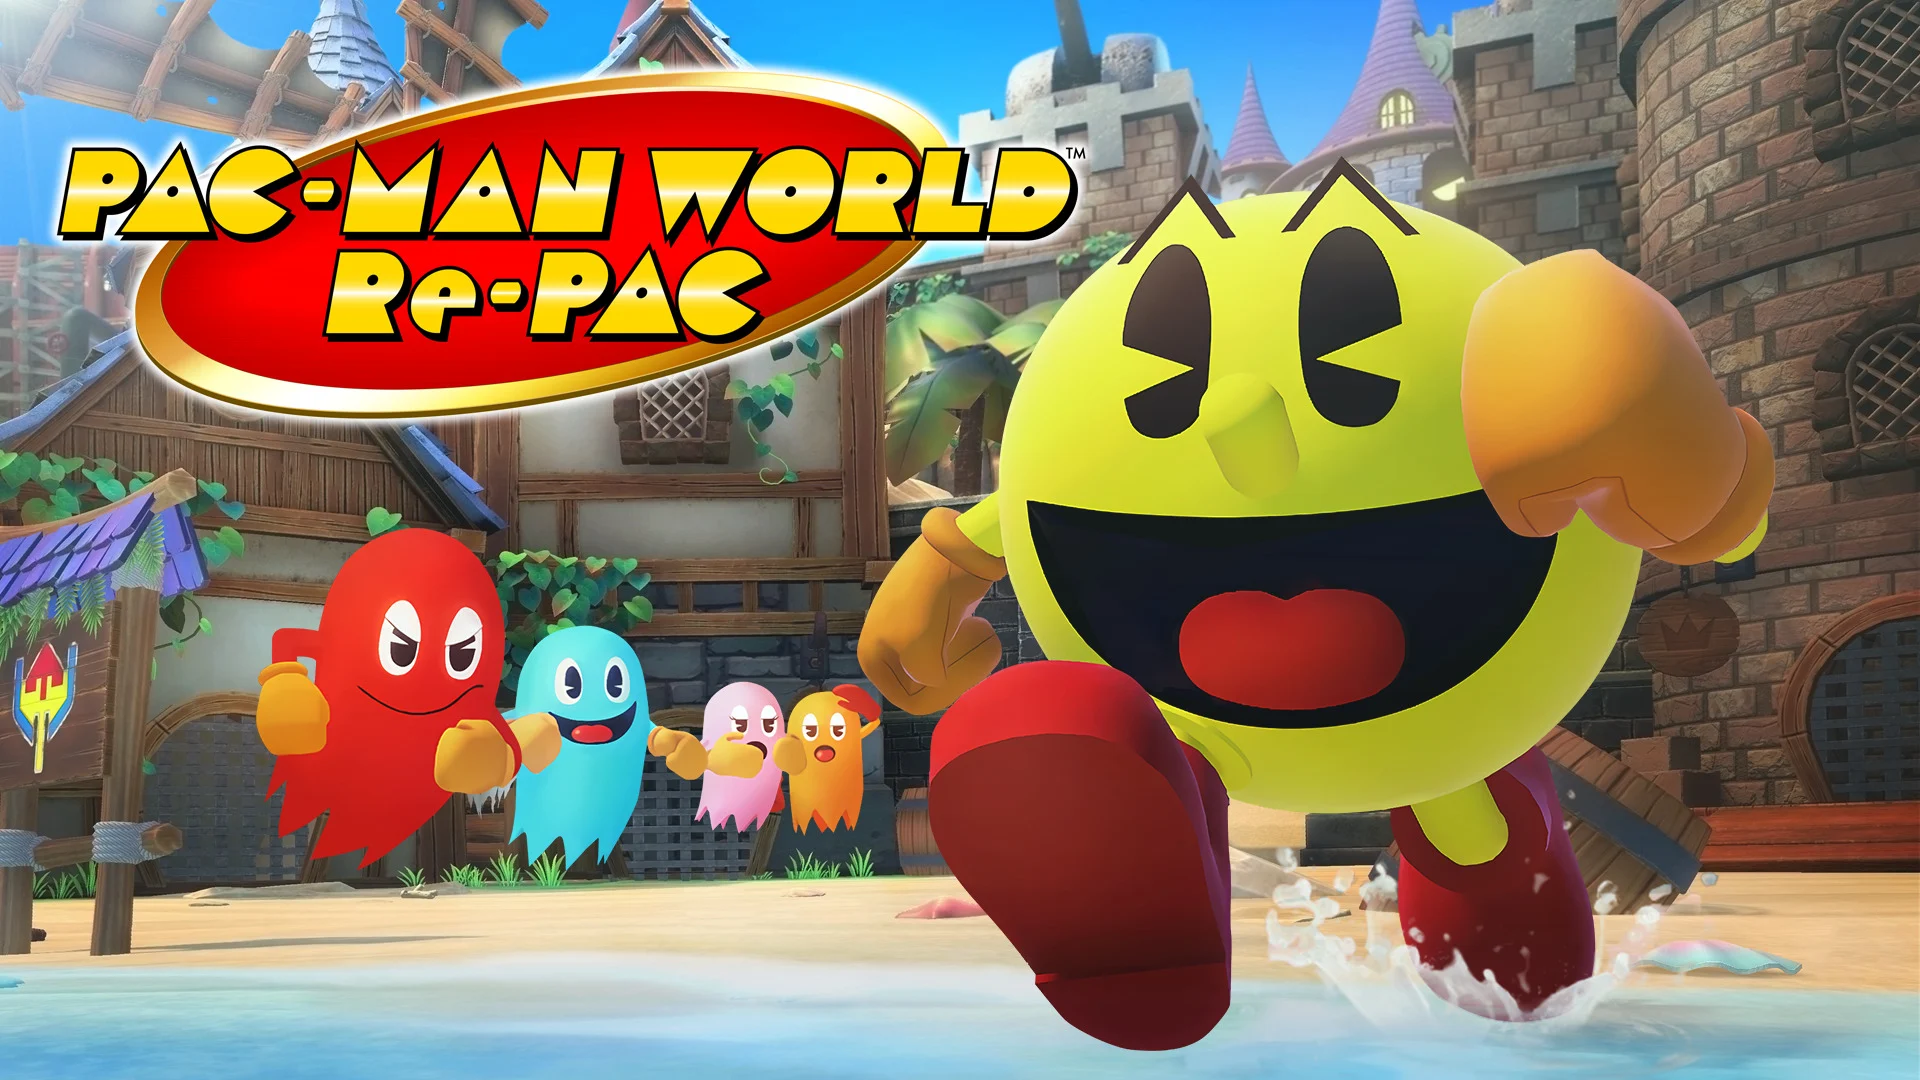 Official art for Pac-Man World Re-PAC